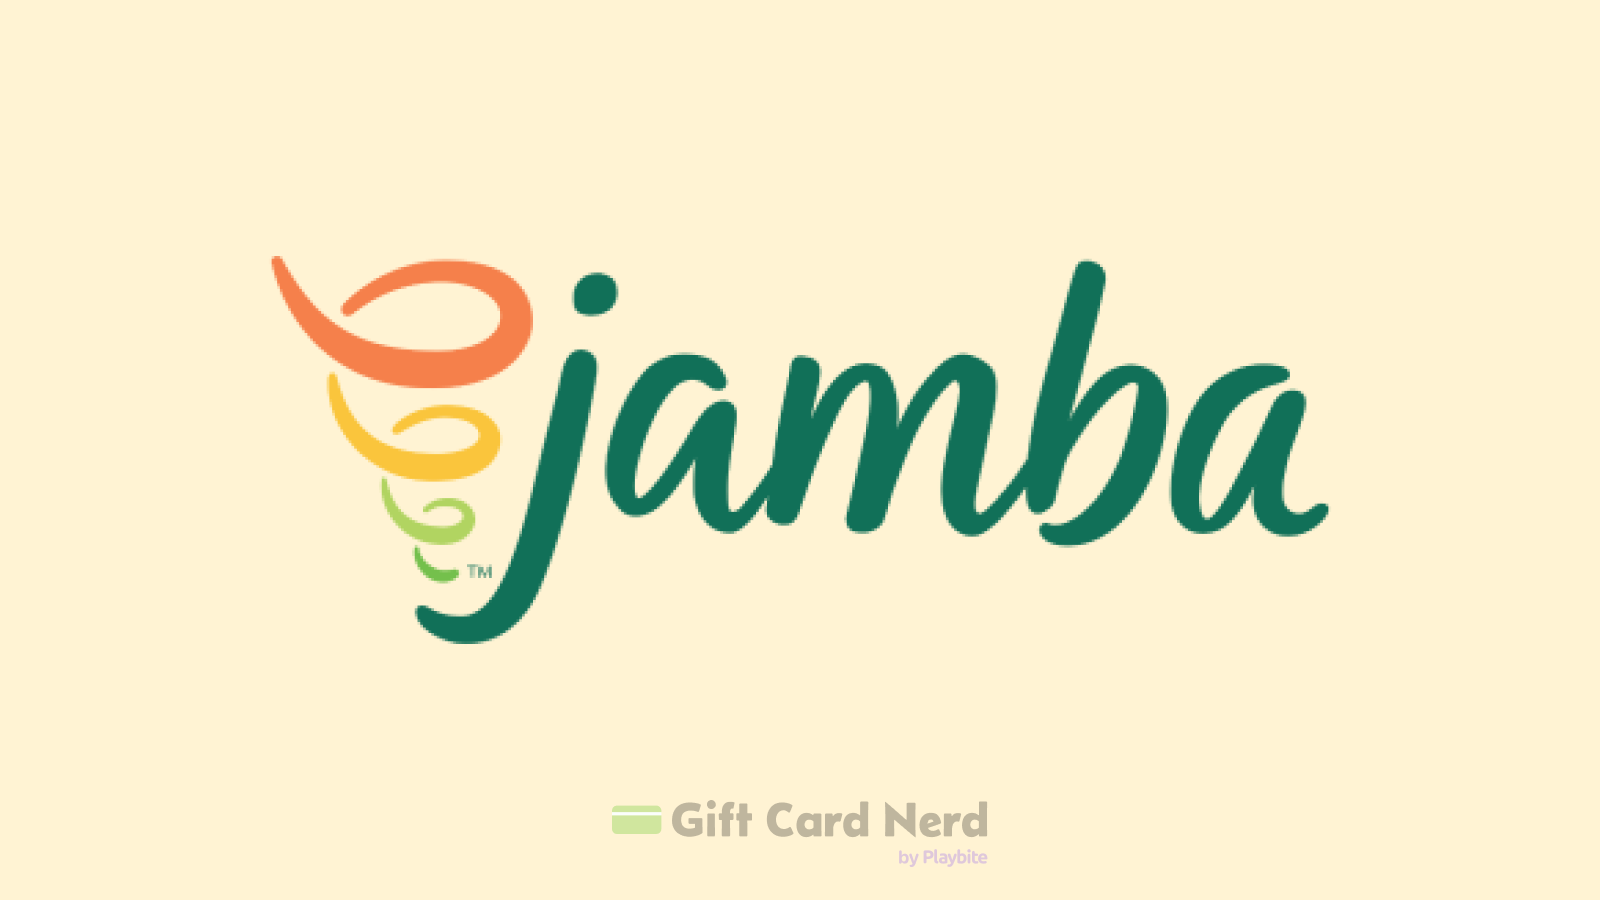 Does Walgreens Sell Jamba Juice Gift Cards?